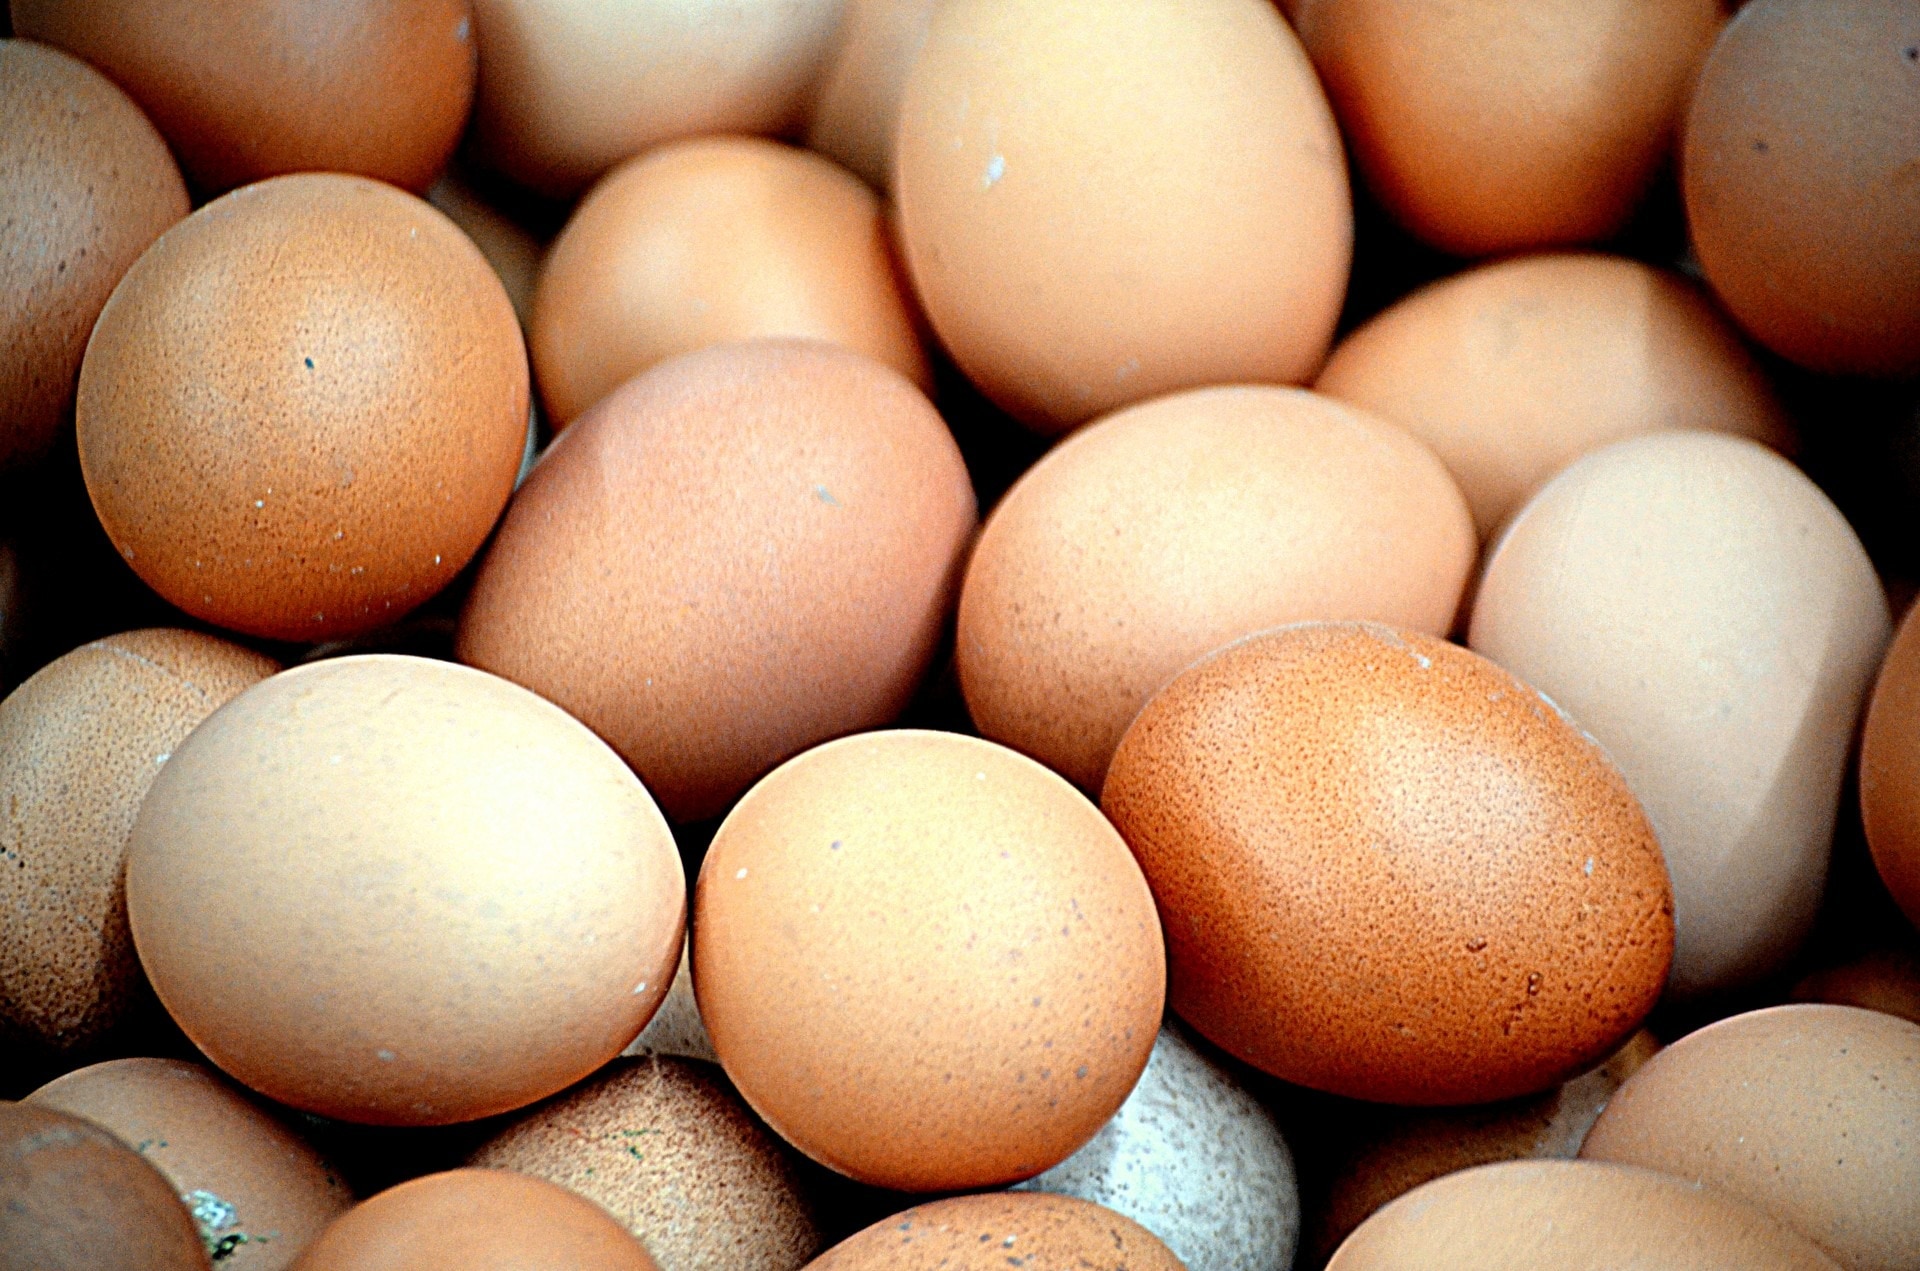 Food, Animals, Chicken Eggs, Eggs, egg, food and drink